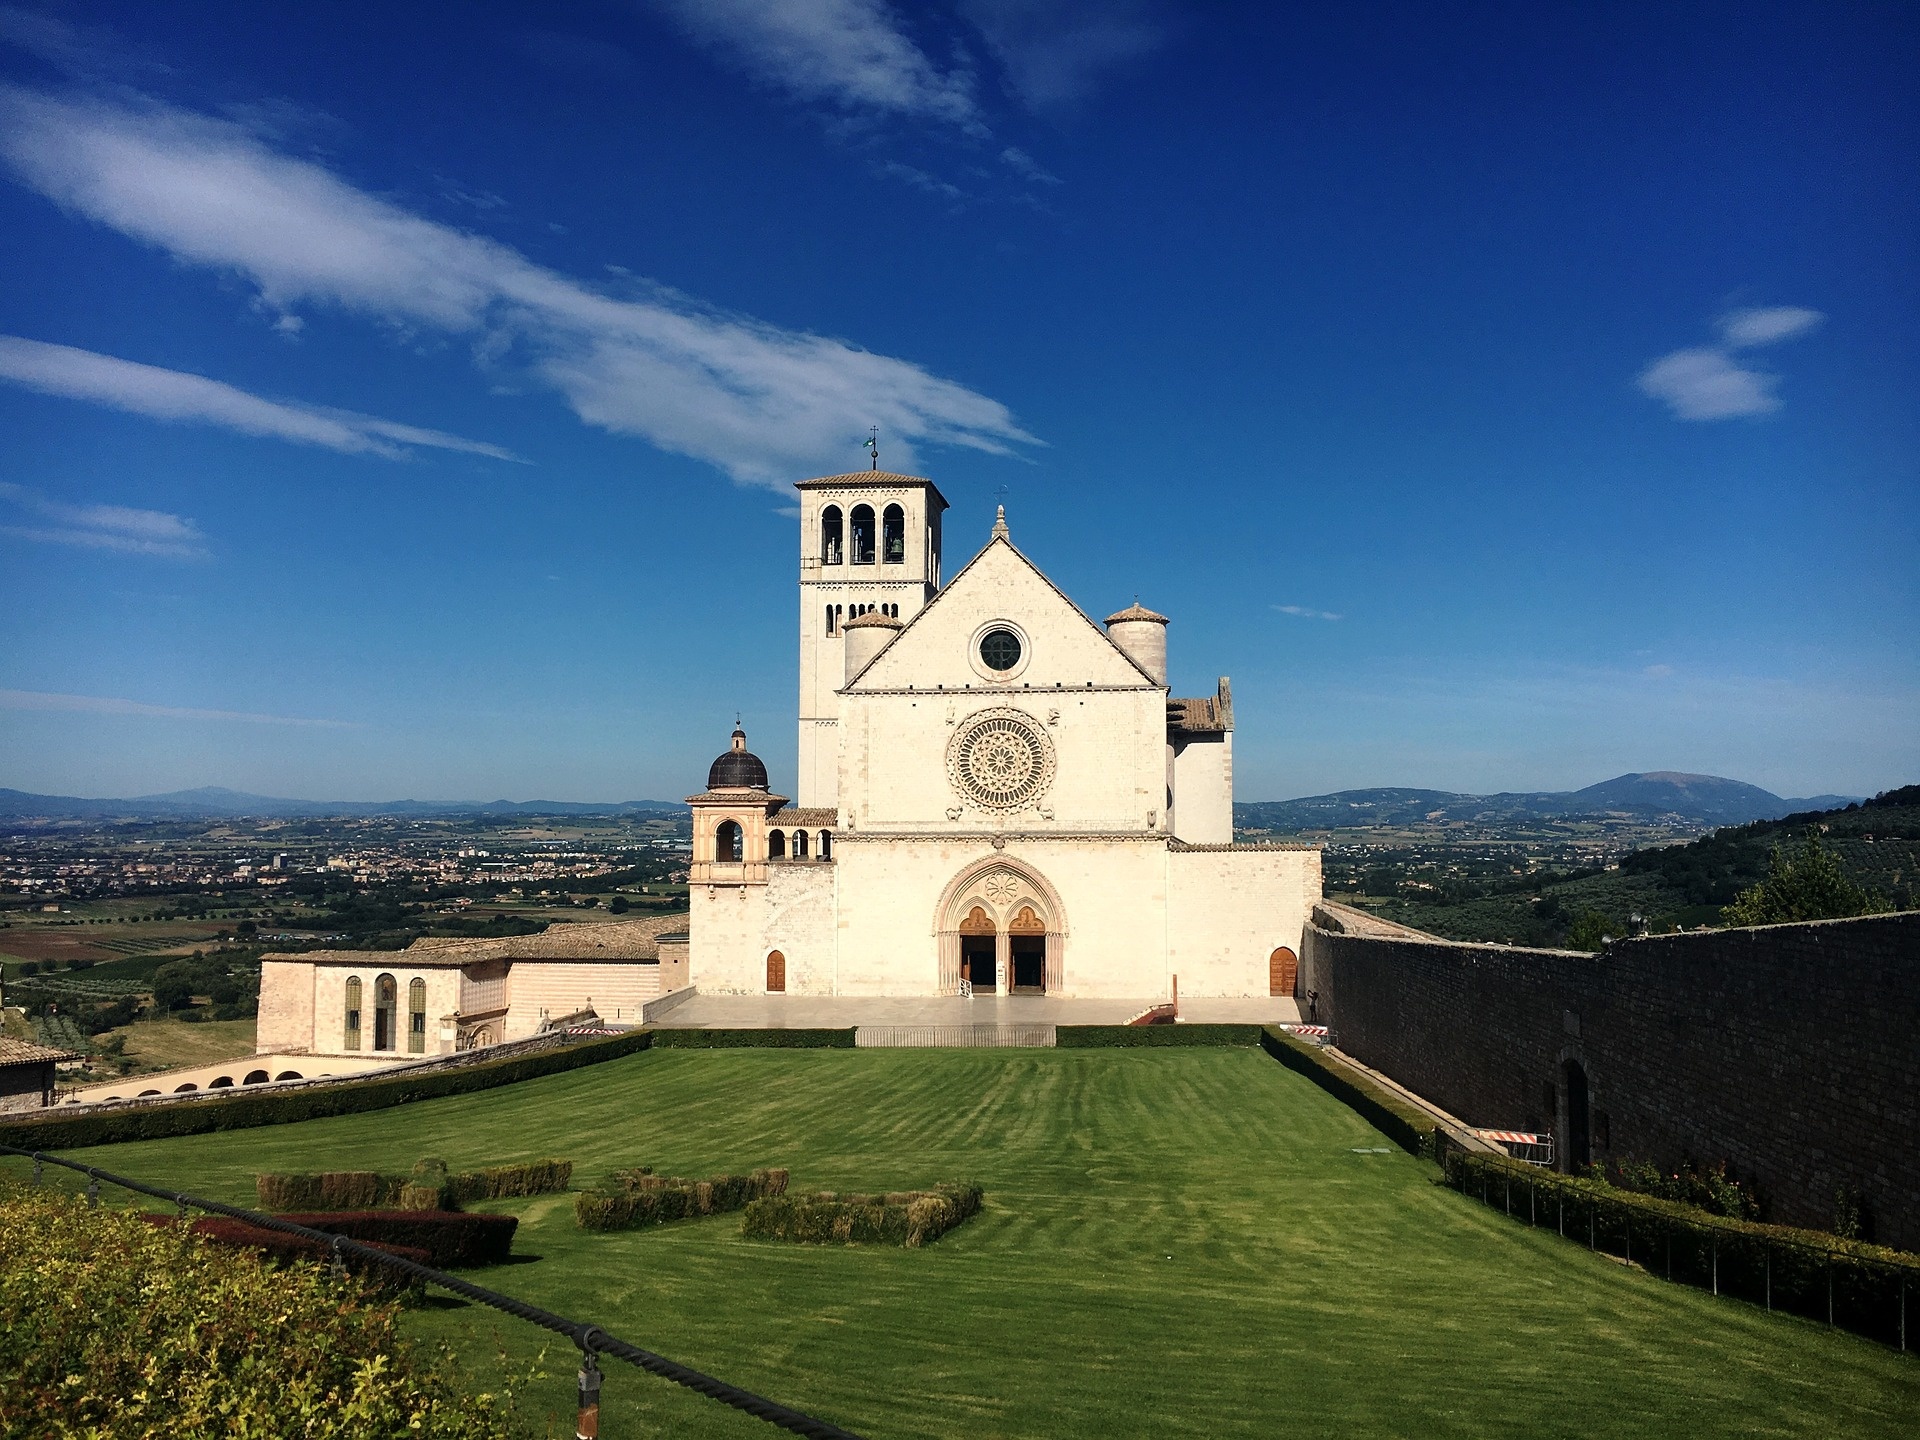 Basilica of Saint Francis of Assisi, Cycling excursions, Umbria discovery, Bike adventures, 1920x1440 HD Desktop